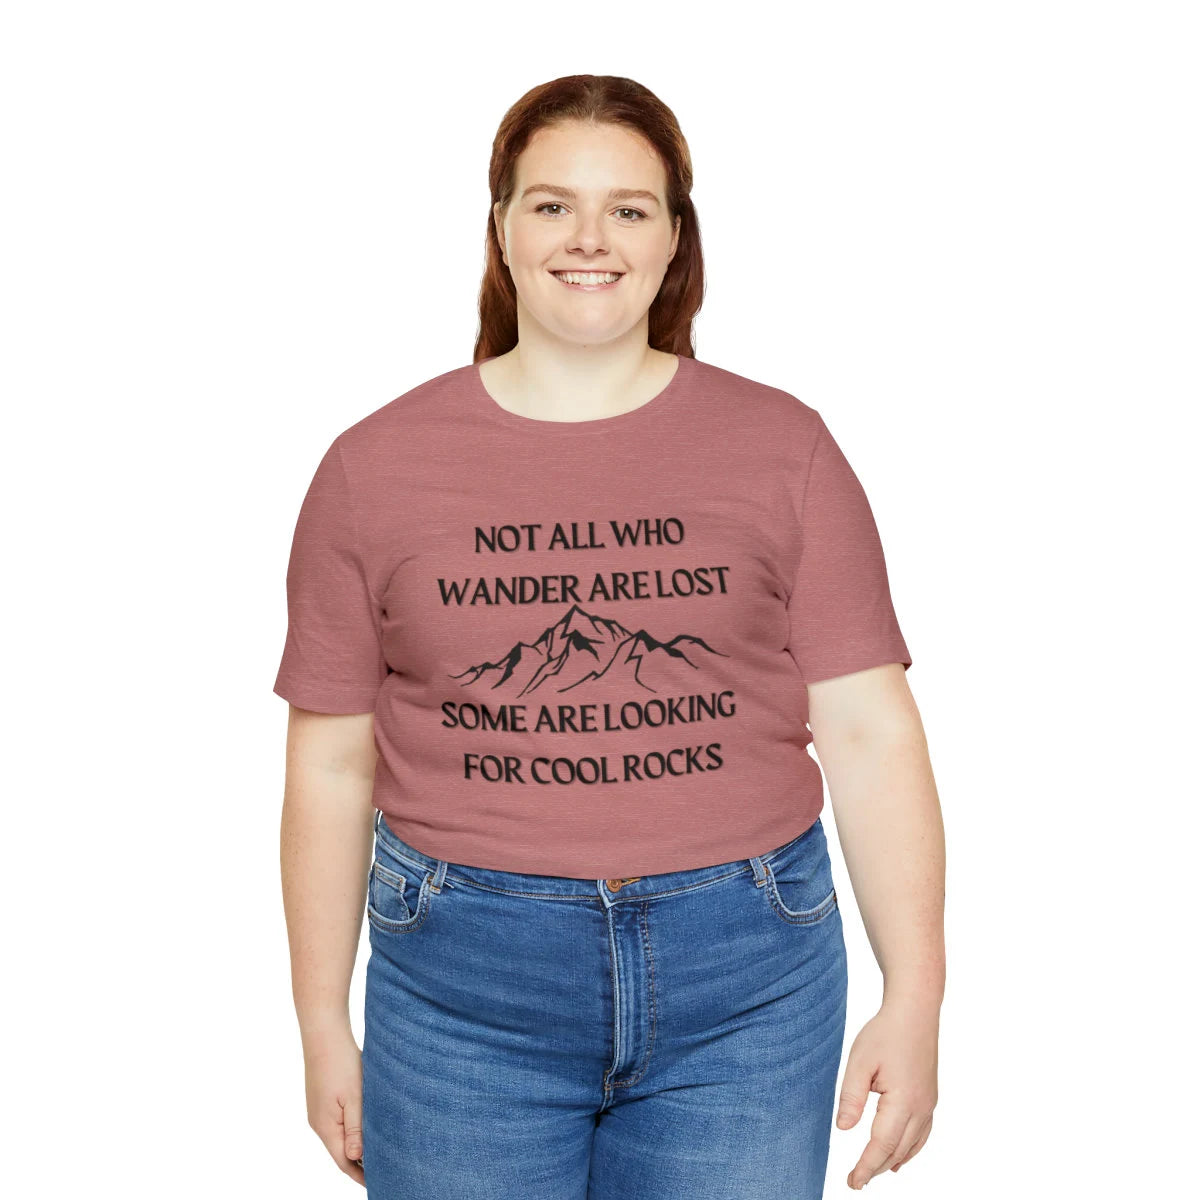 Not all that wander are lost some are looking for cool rocks shirt - Mountain T-Shirt